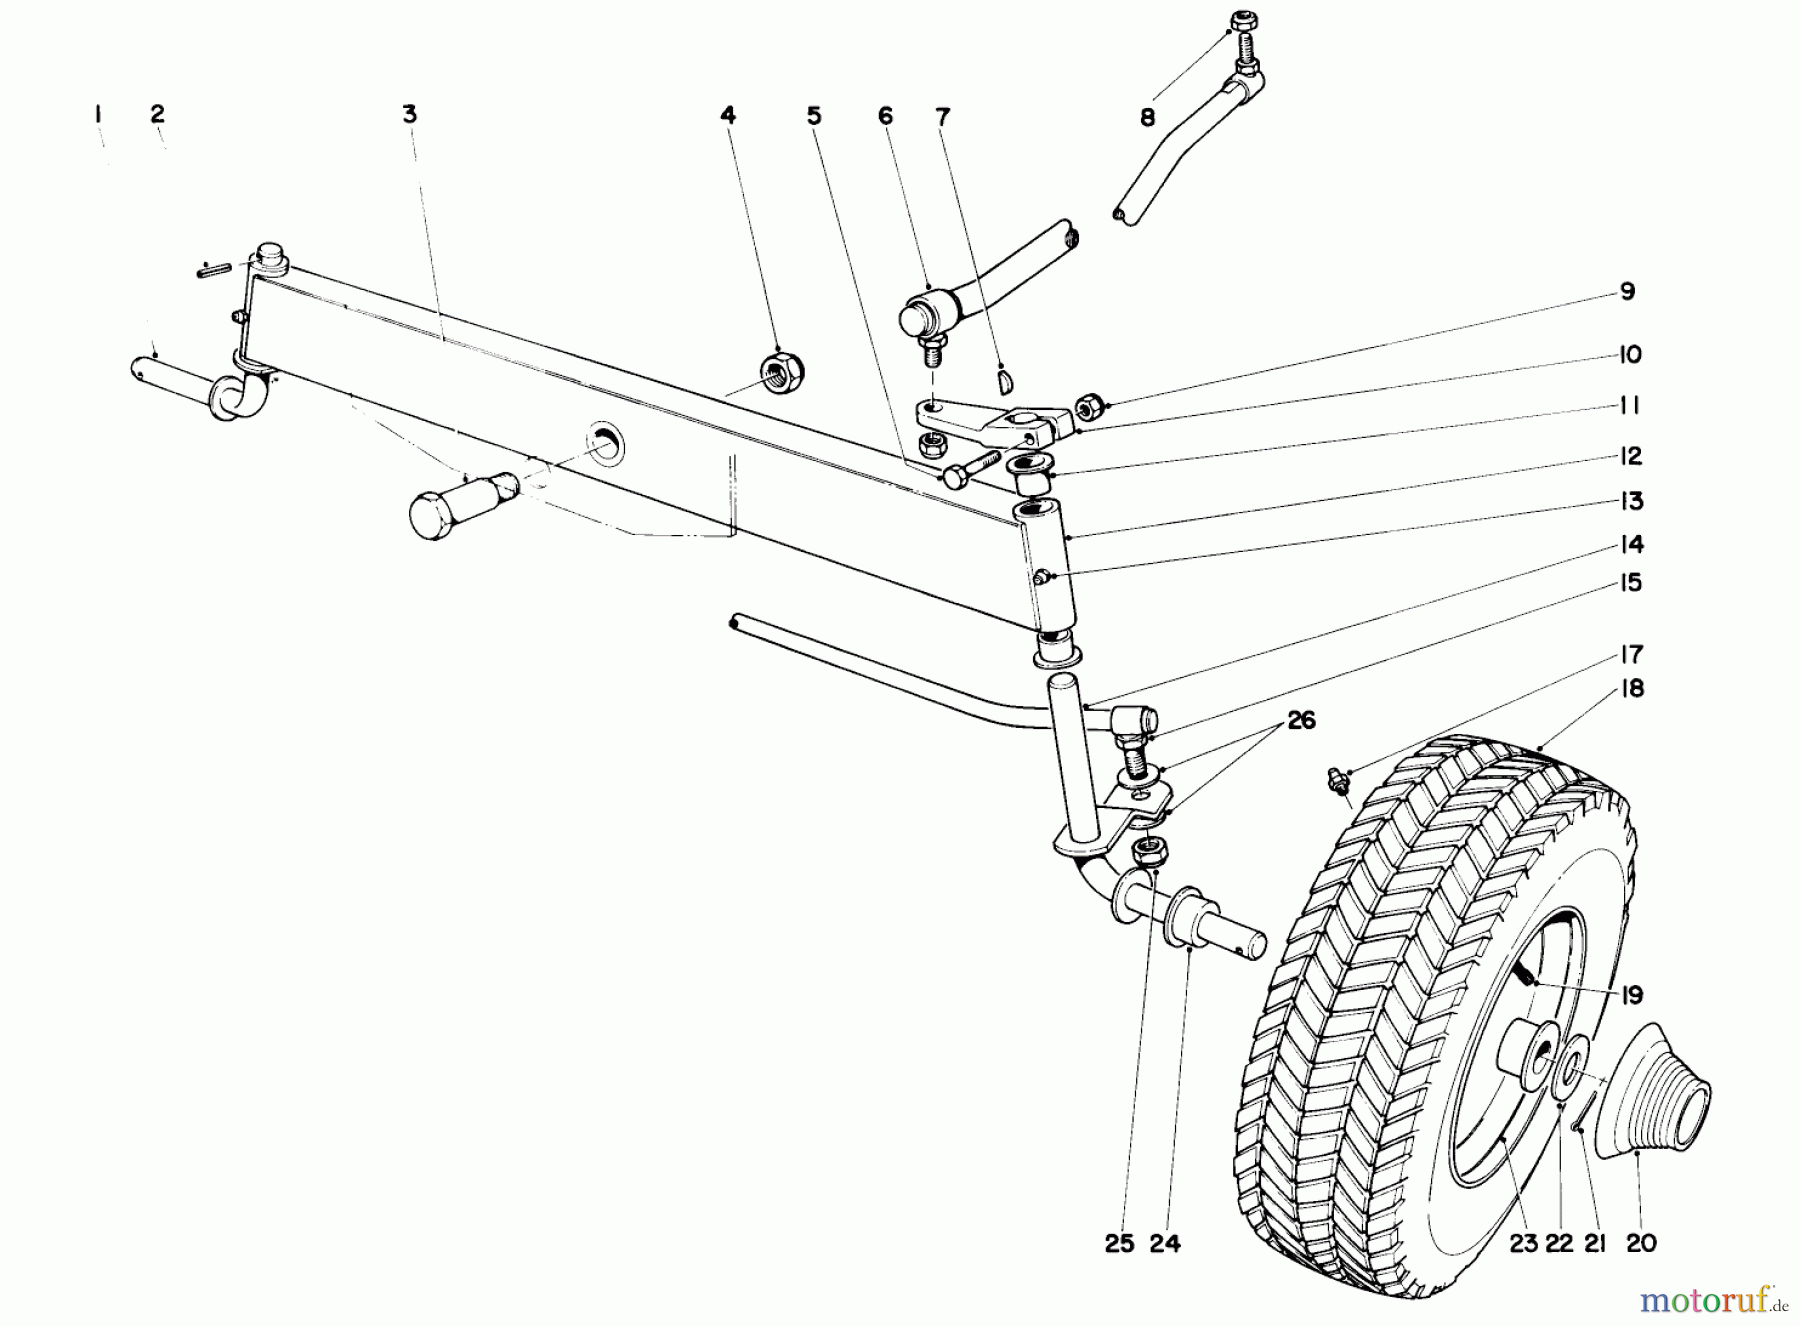  Toro Neu Mowers, Lawn & Garden Tractor Seite 1 55051 (800) - Toro 800 Electric Lawn Tractor, 1970 (0000001-0999999) FRONT AXLE ASSEMBLY